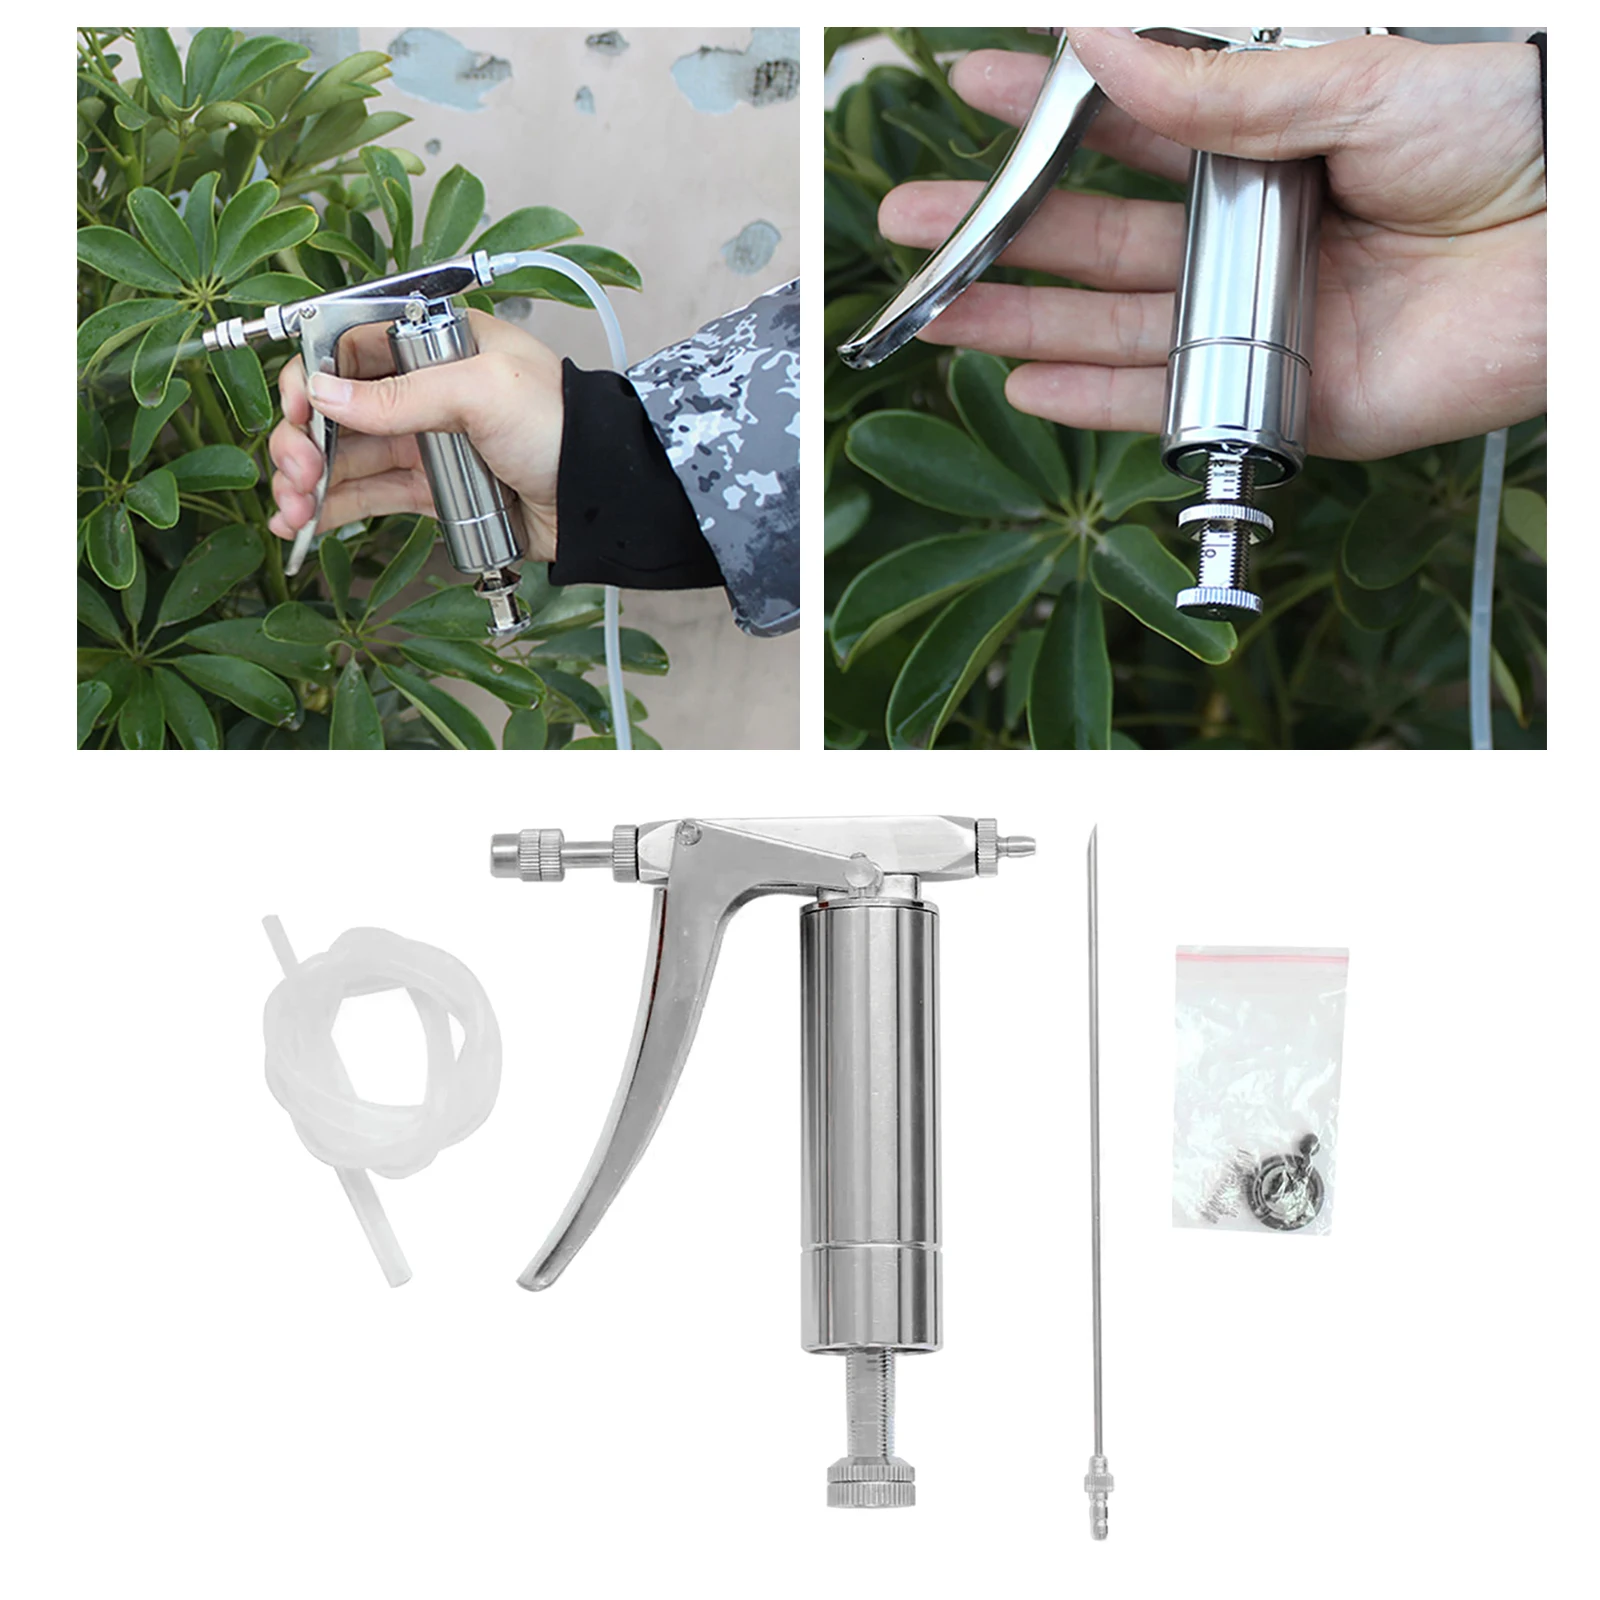 Details about   Stainless Steel Adjustable Beekeeping Pollination Sprayer Tool Accessories 